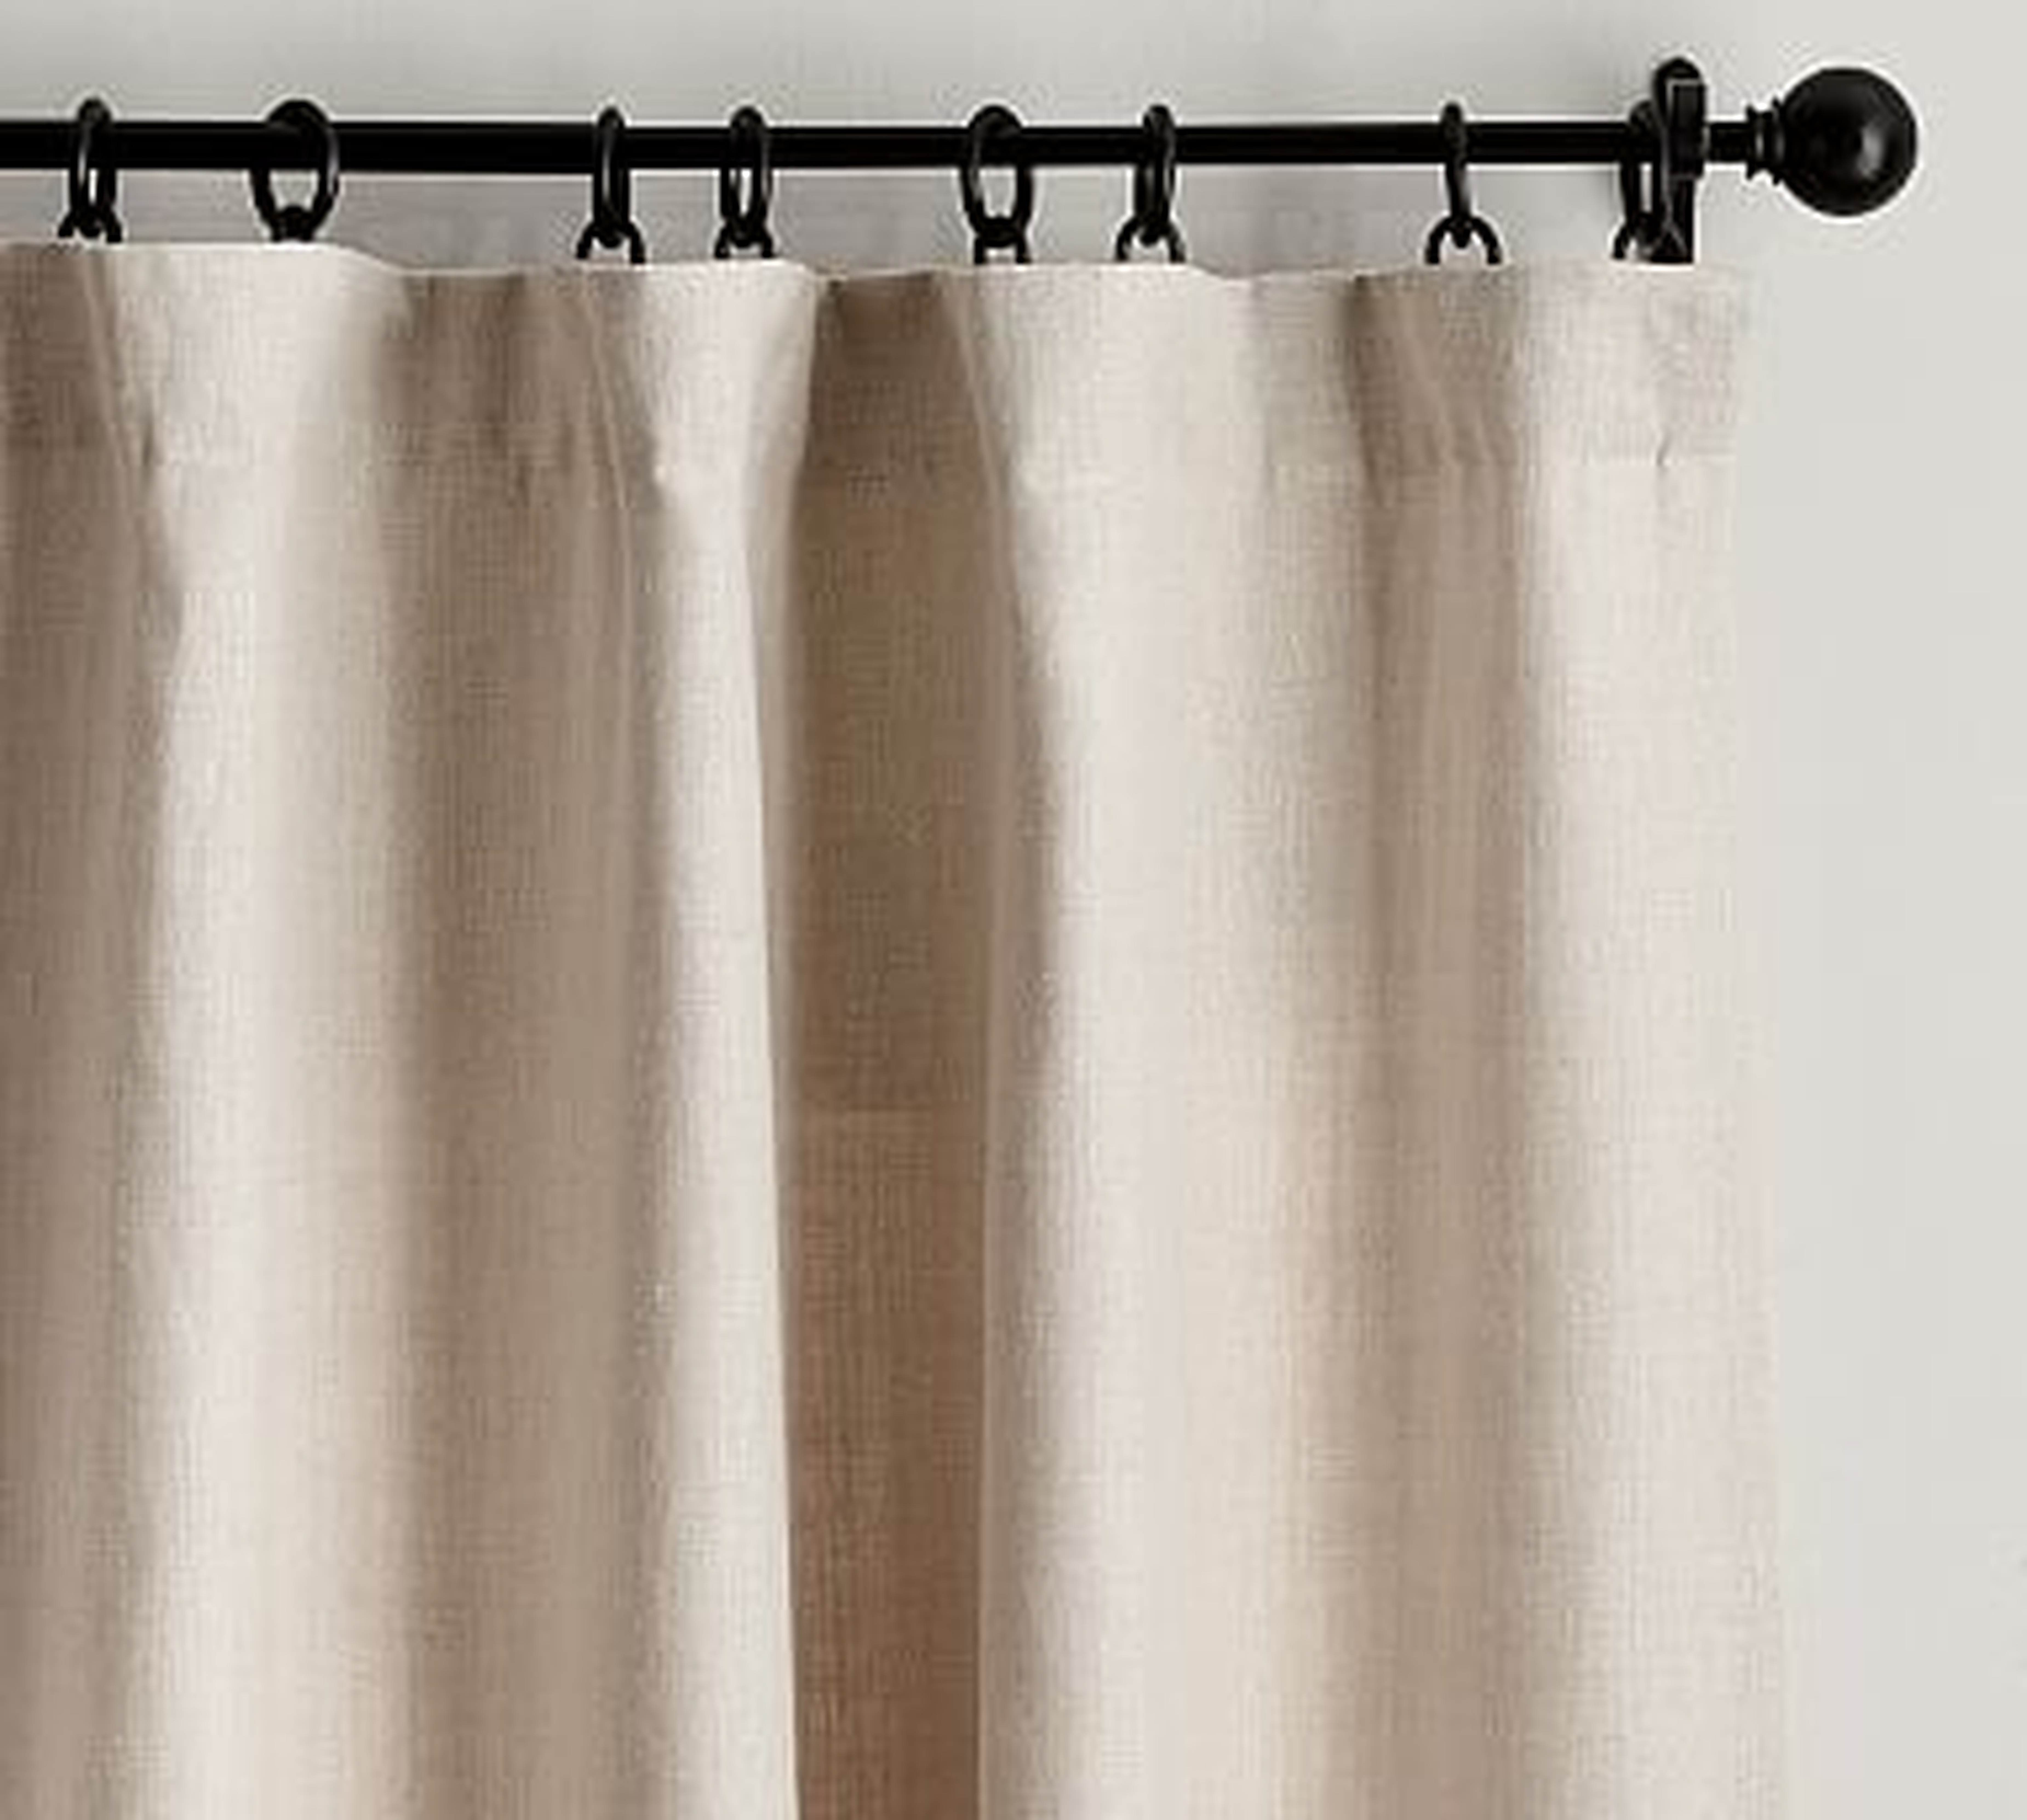 Belgian Linen Rod Pocket Curtain Made with Libeco(TM) Linen, Unlined, 50 x 108", Natural - Pottery Barn